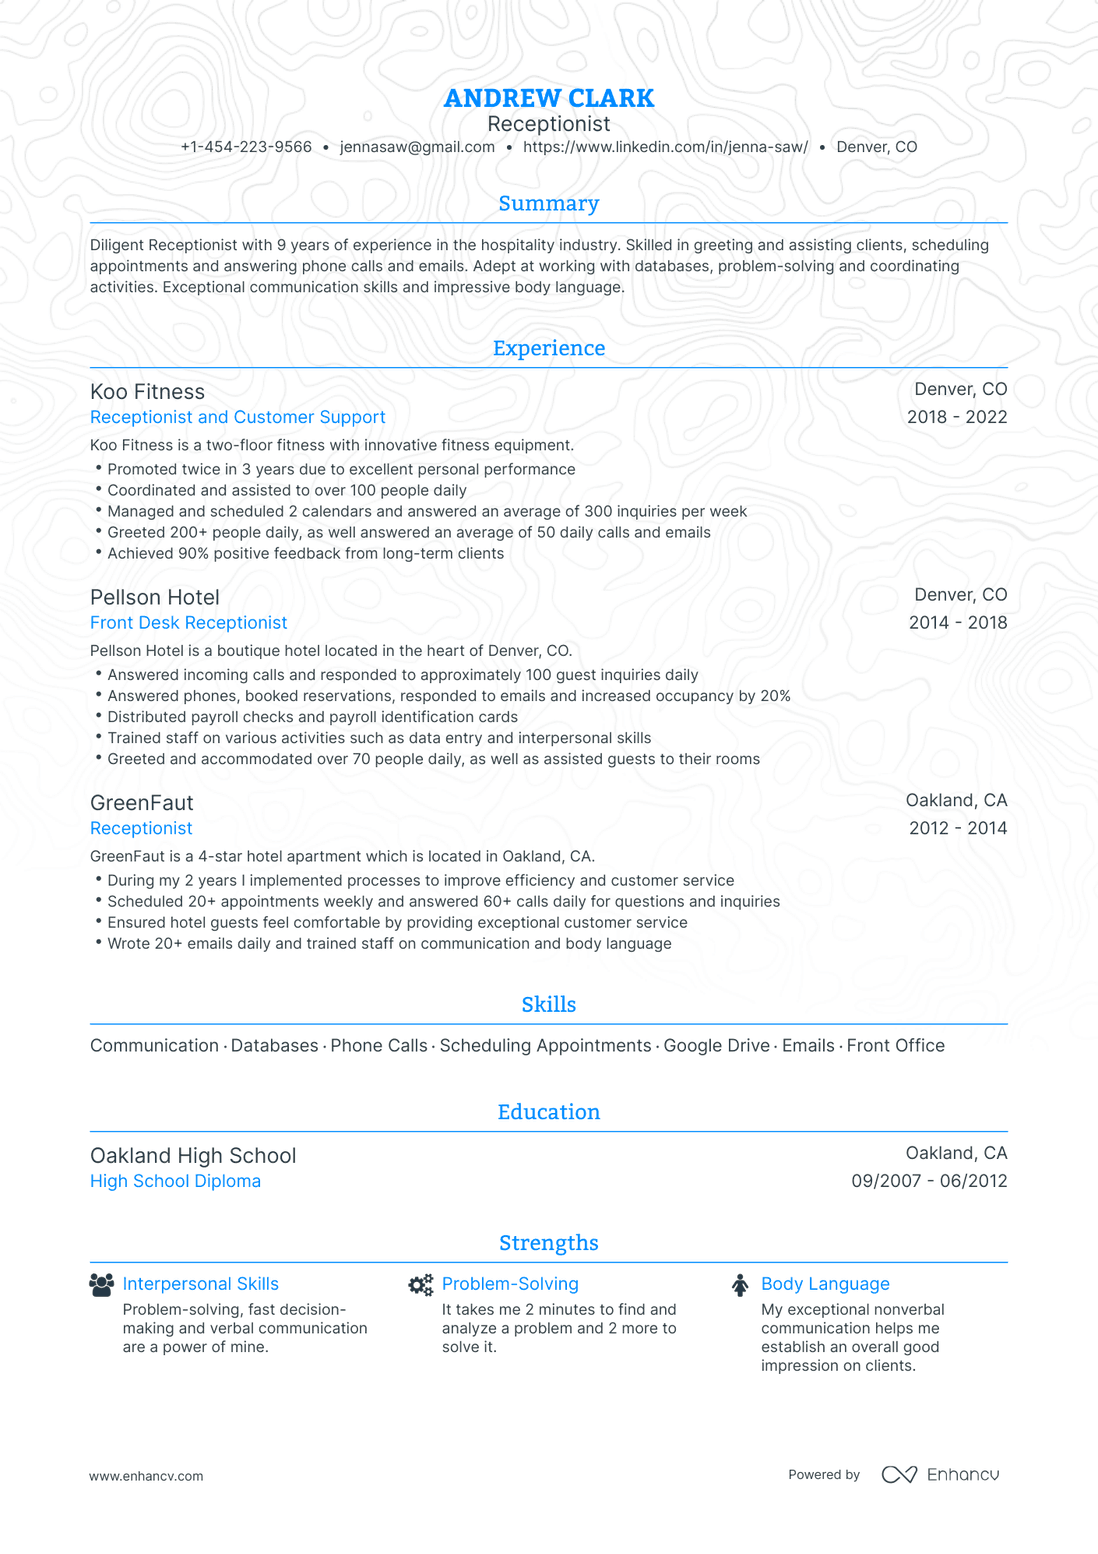 Traditional Front Desk Receptionist Resume Template